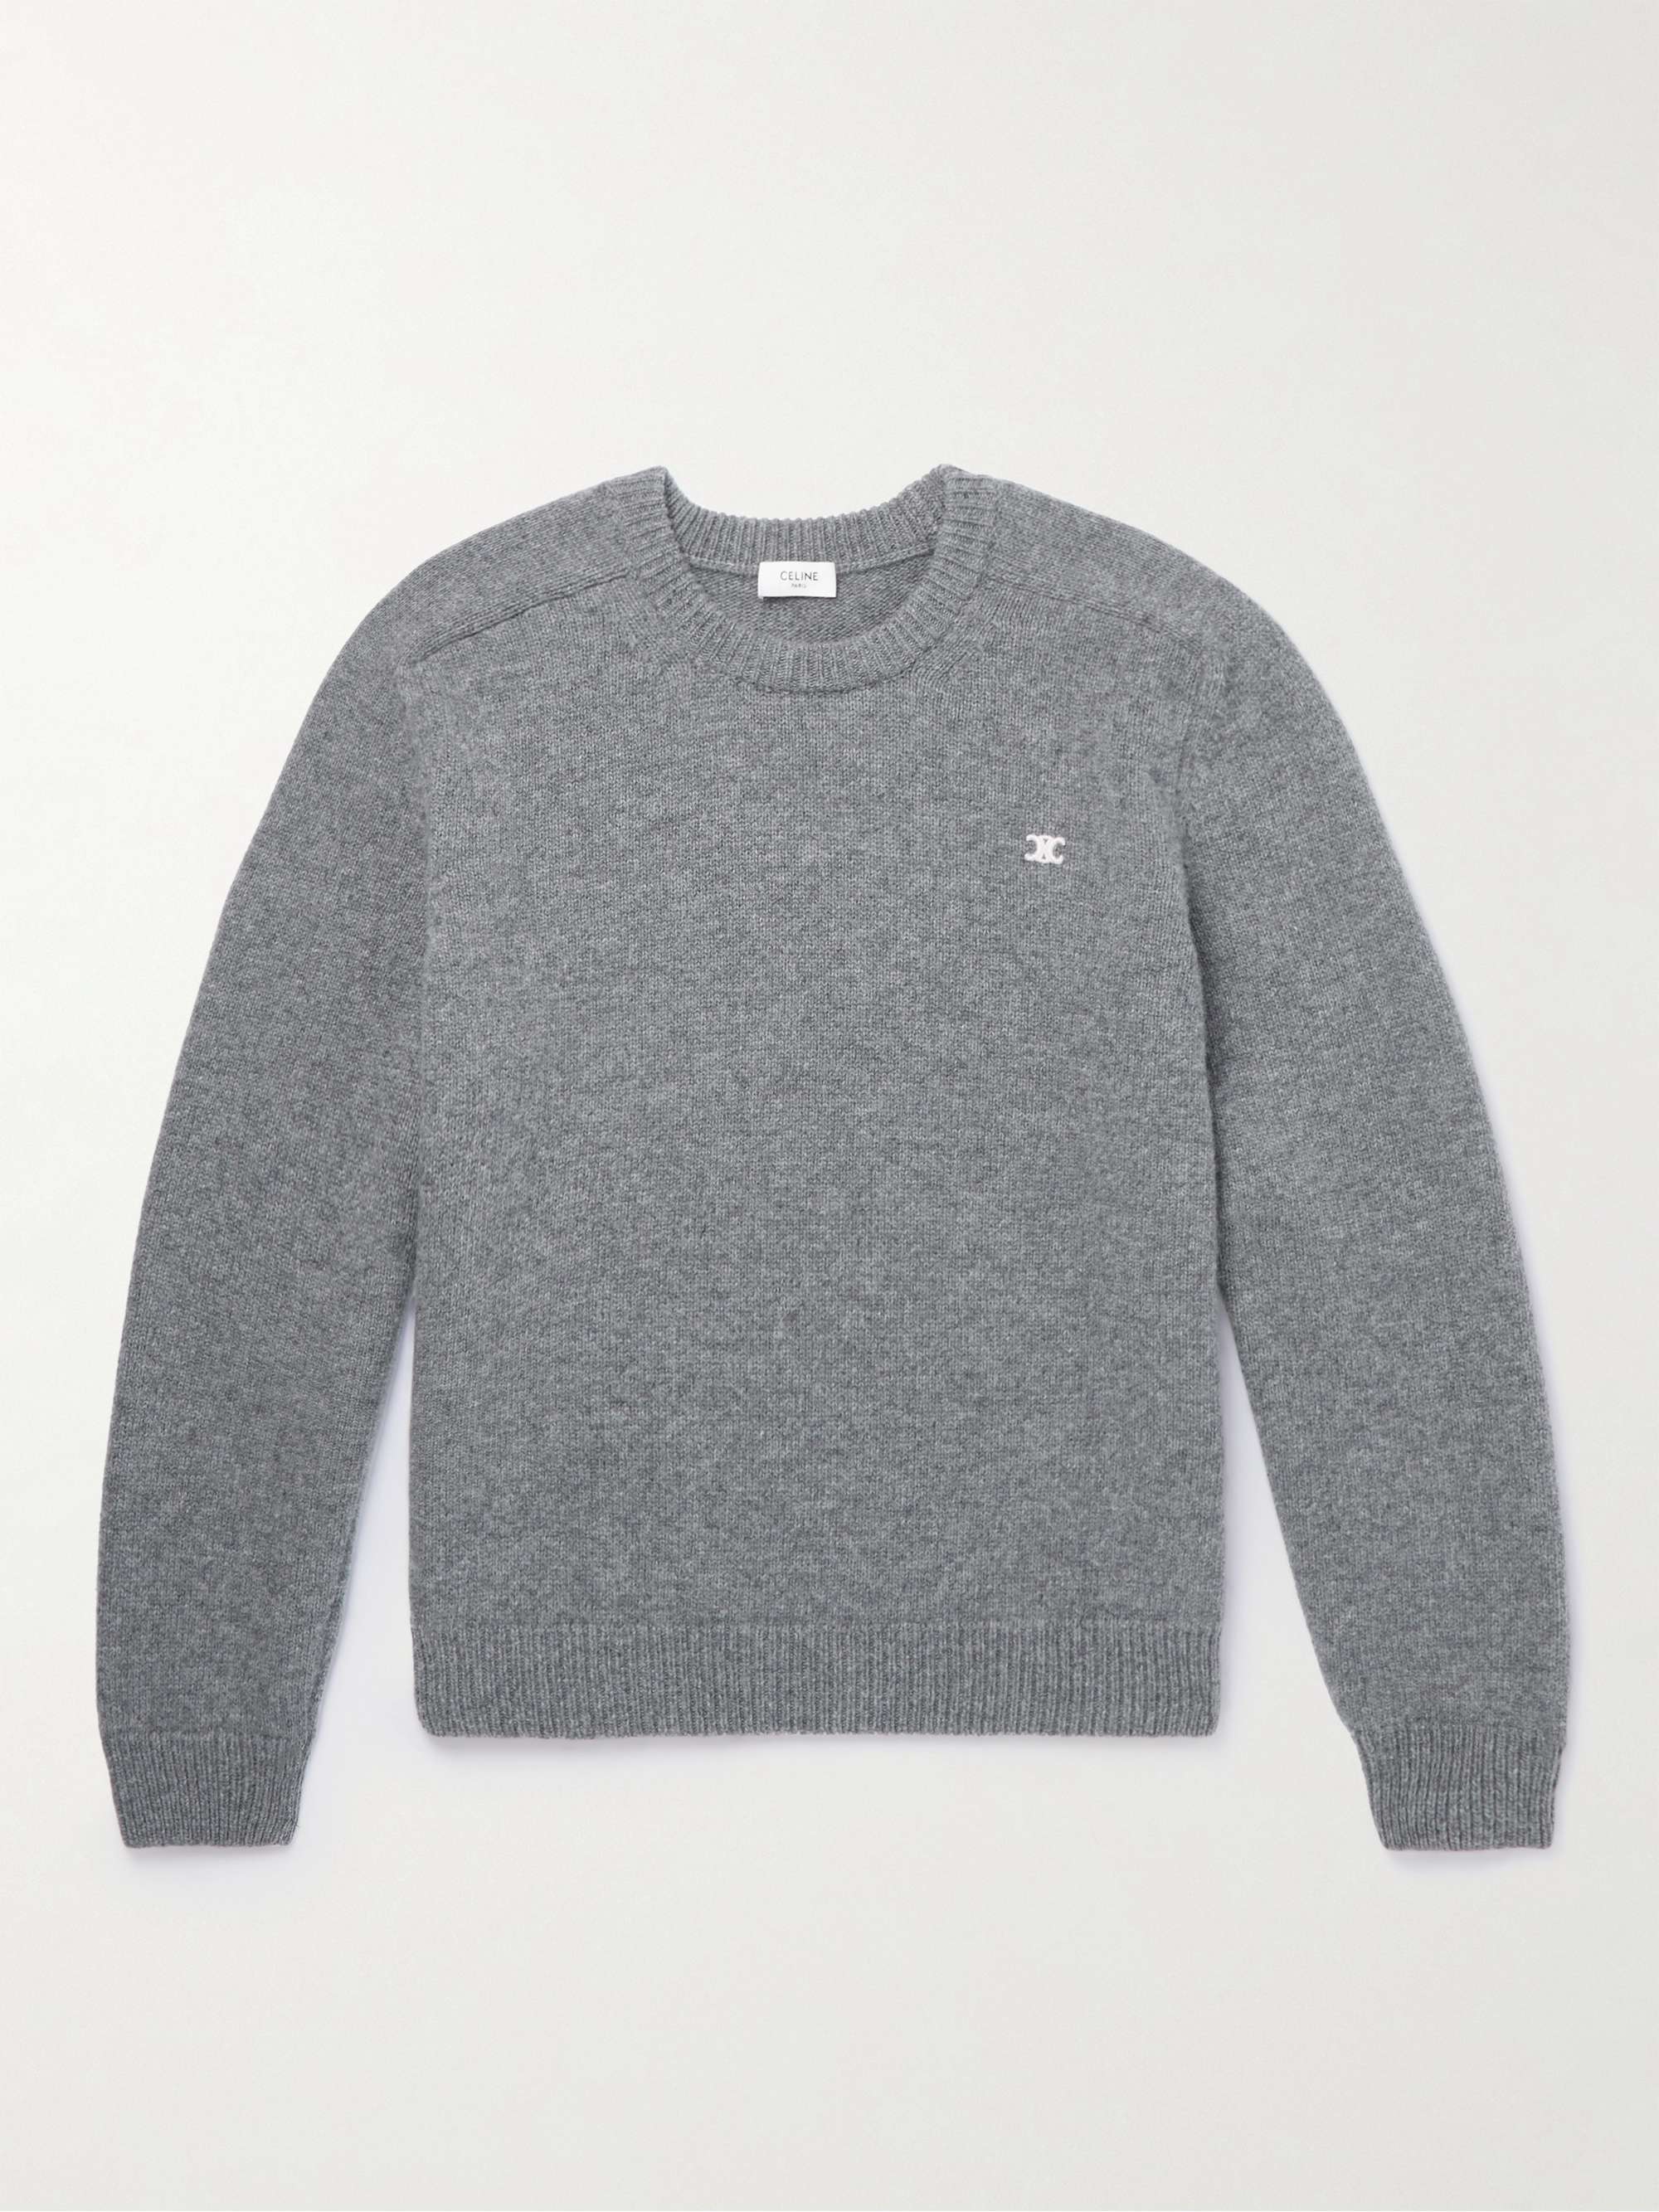 CELINE HOMME Logo-Embroidered Wool and Cashmere-Blend Sweater for Men